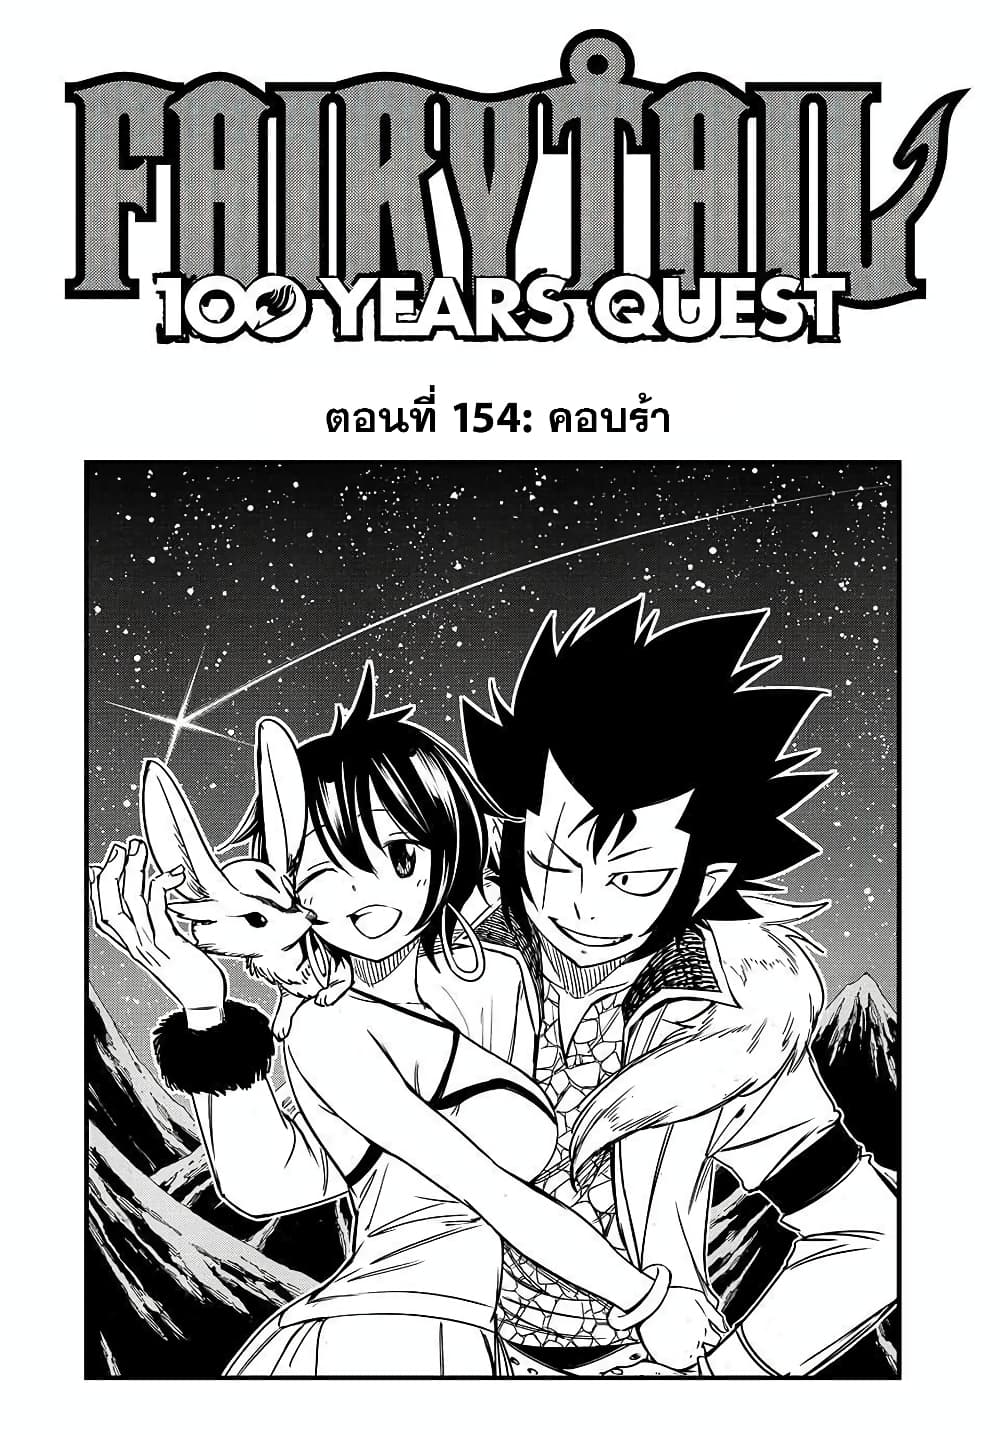 Fairy Tail 100 Years Quest 154 TH